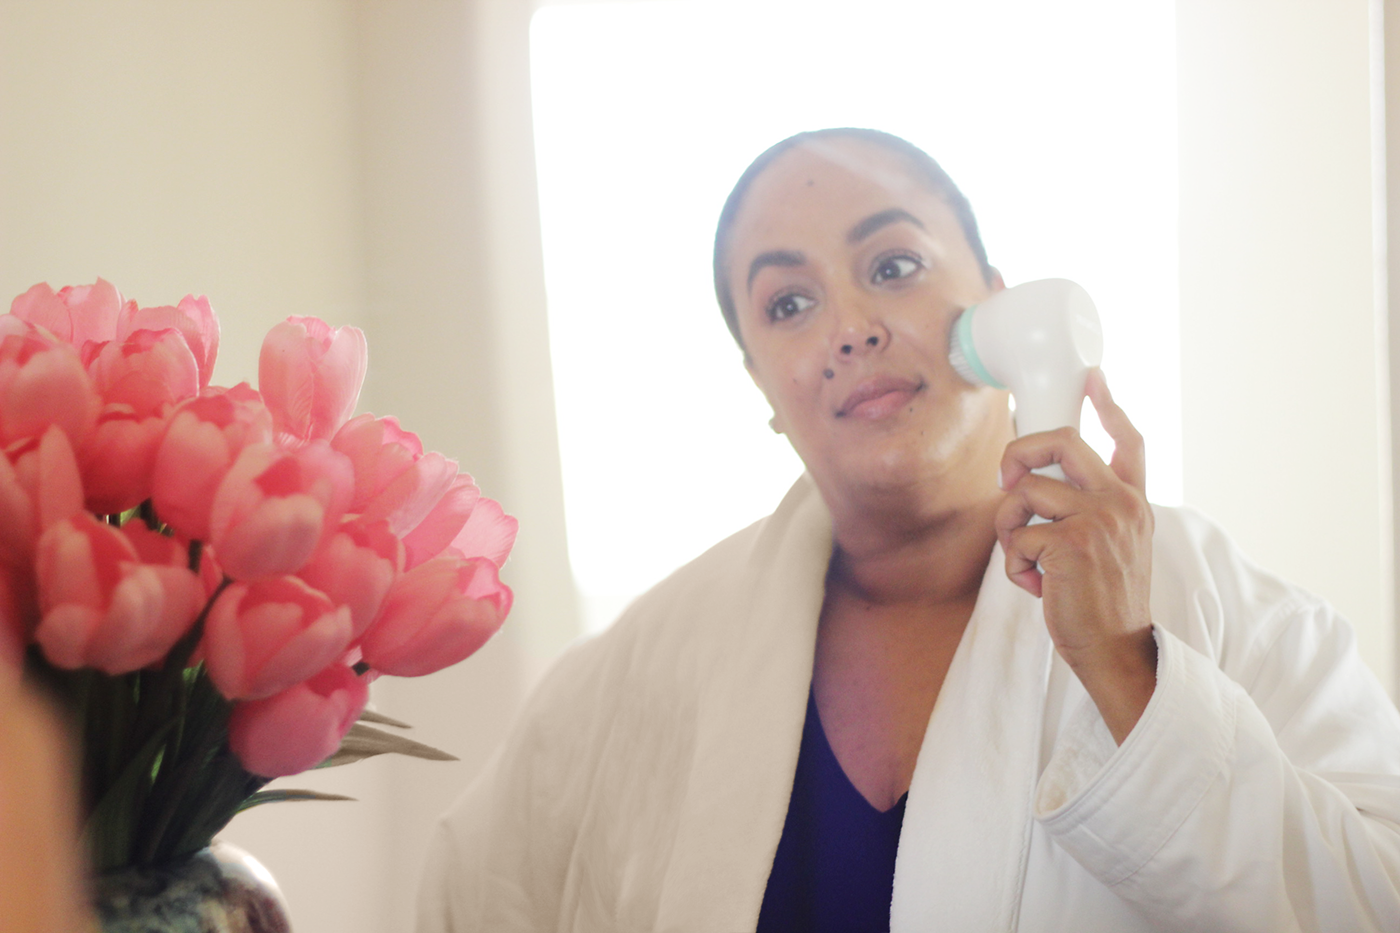 Hands down this is the BEST cleansing brush EVER. See why I am currently loving the Conair True Glow Sonic Facial Cleansing Brush.